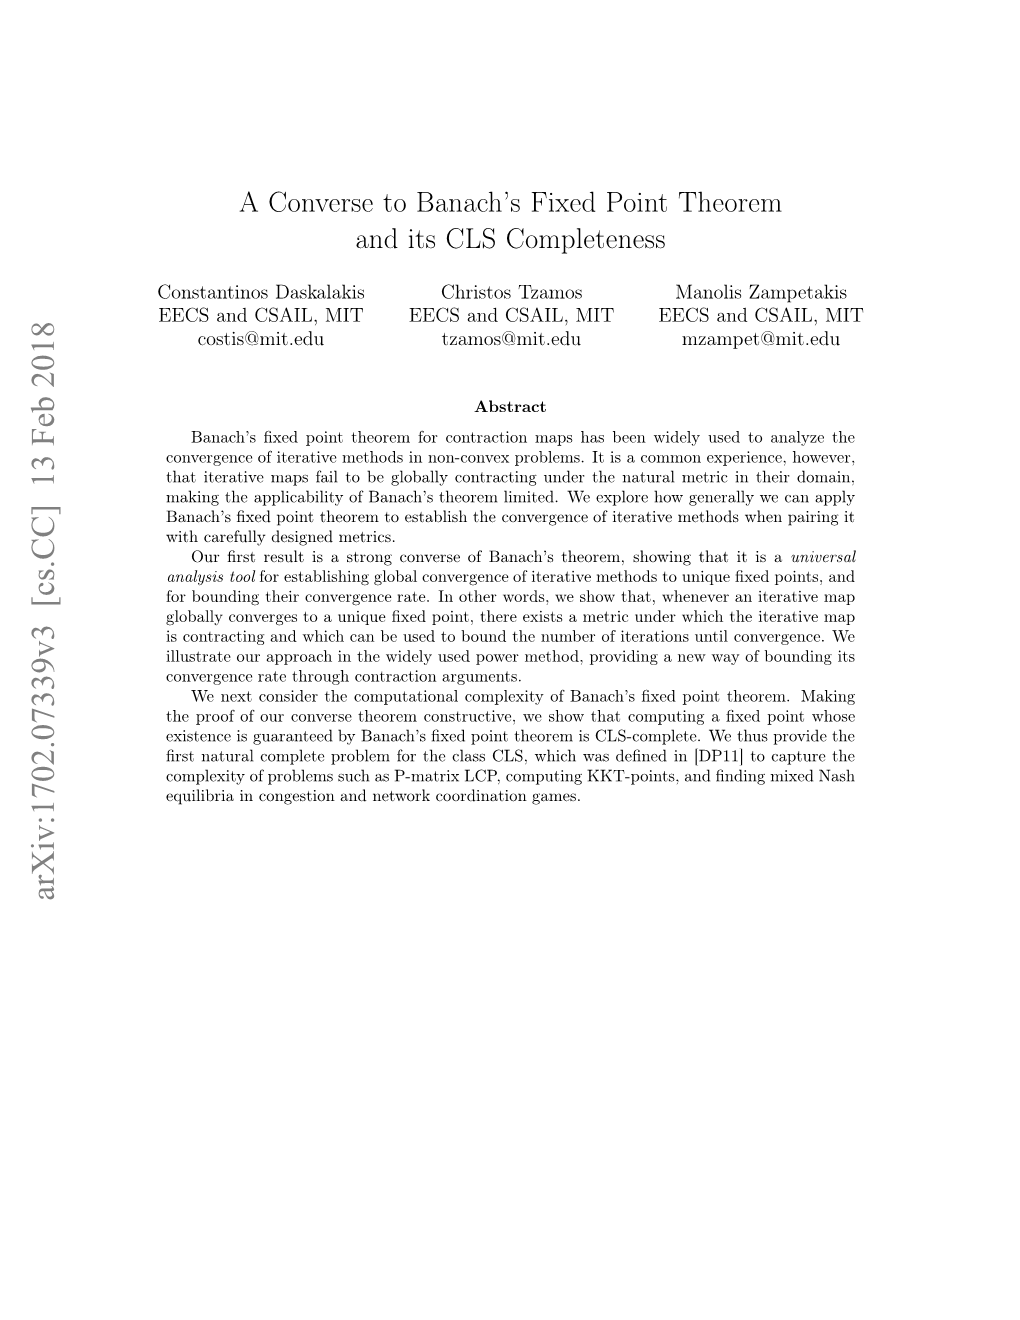 A Converse to Banach's Fixed Point Theorem and Its CLS Completeness